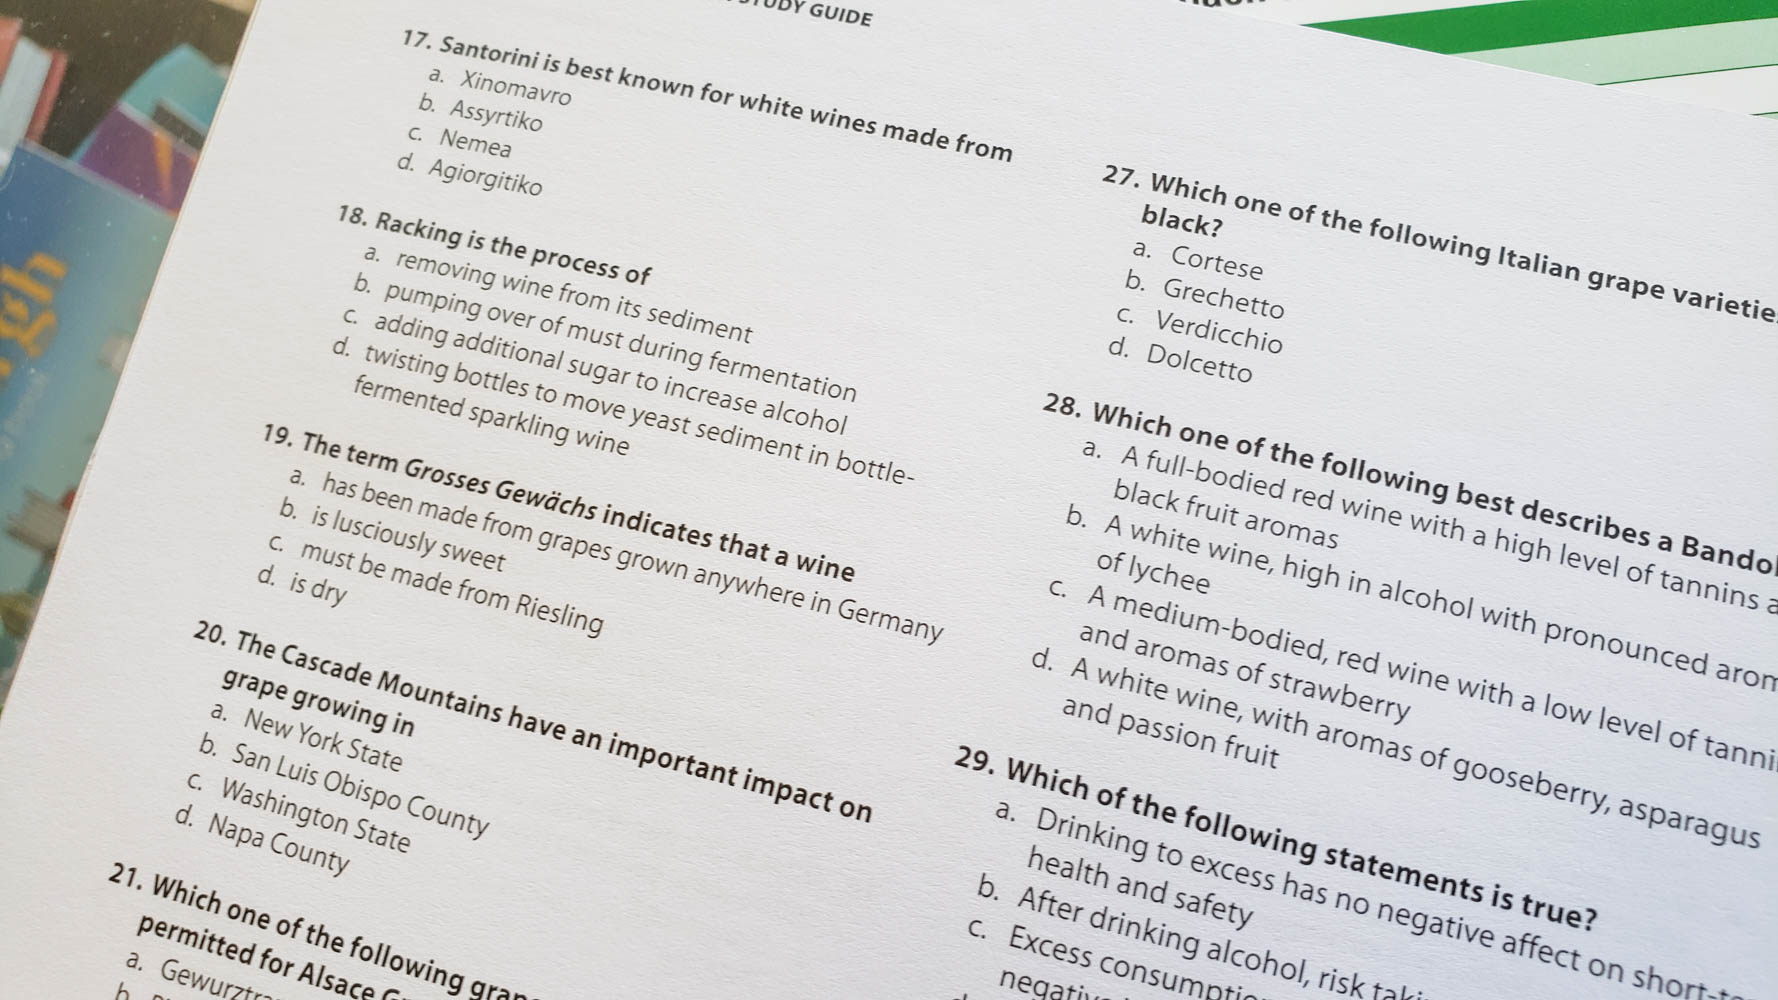 Example Questions for WSET Level 3 Exam